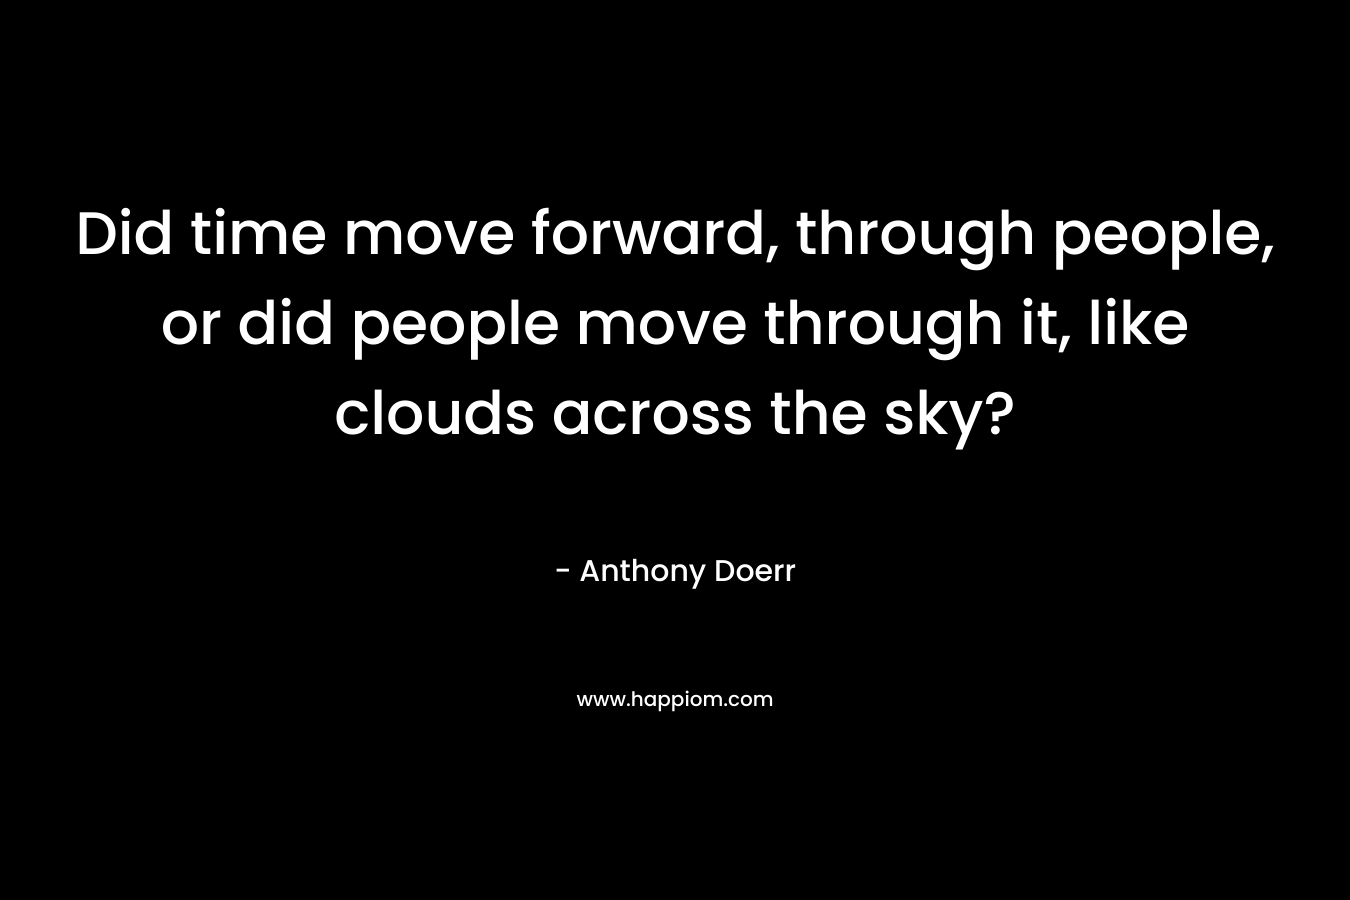 Did time move forward, through people, or did people move through it, like clouds across the sky?